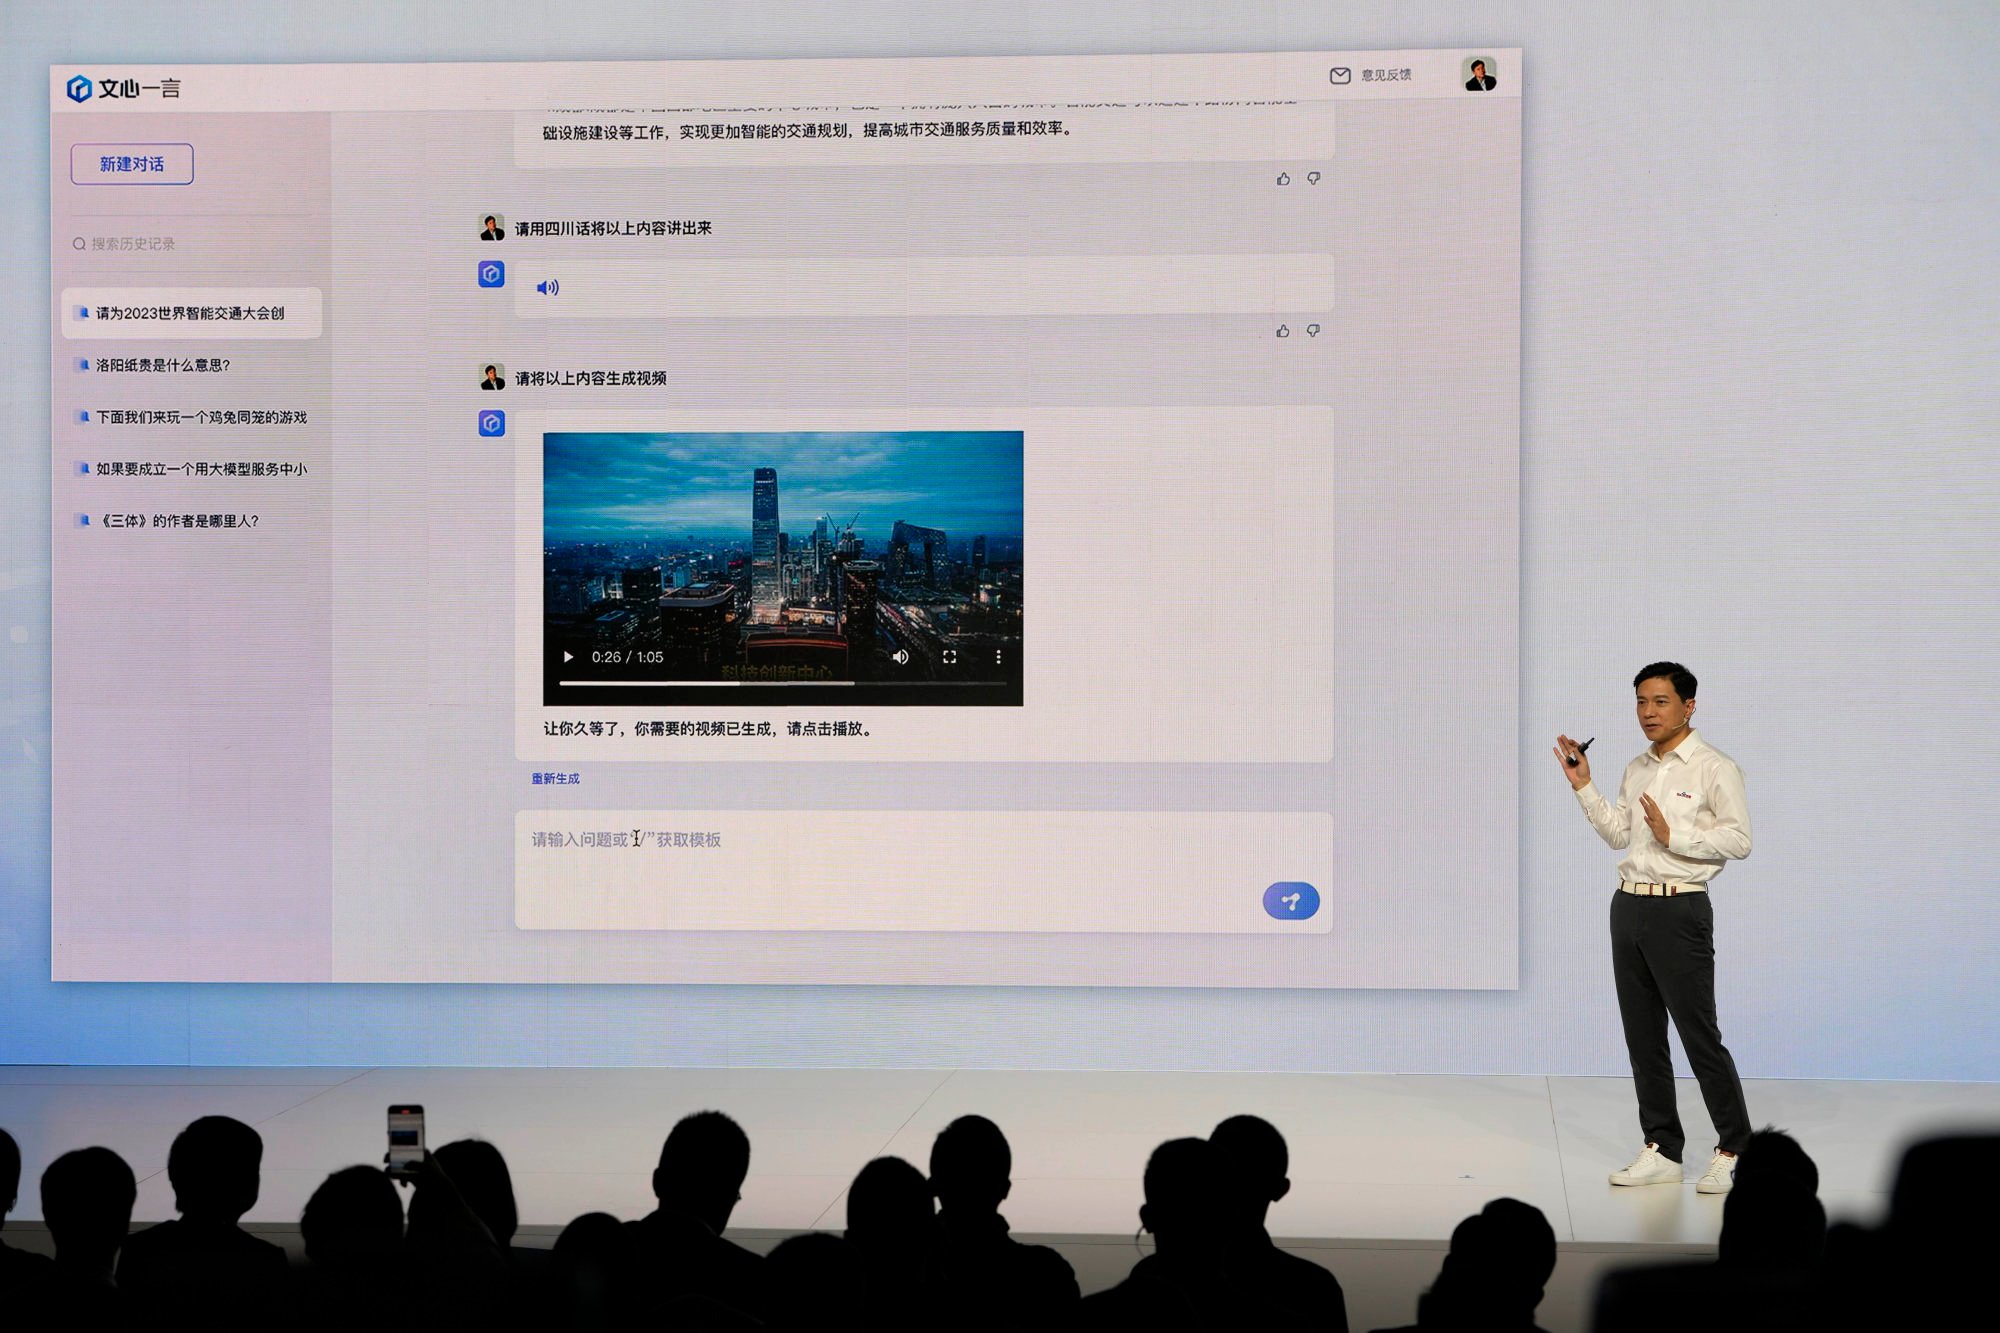 Baidu CEO Robin Li Yanhong introduces the functions of Ernie Bot during a launch event in Beijing on March 16. Photo: AP Photo